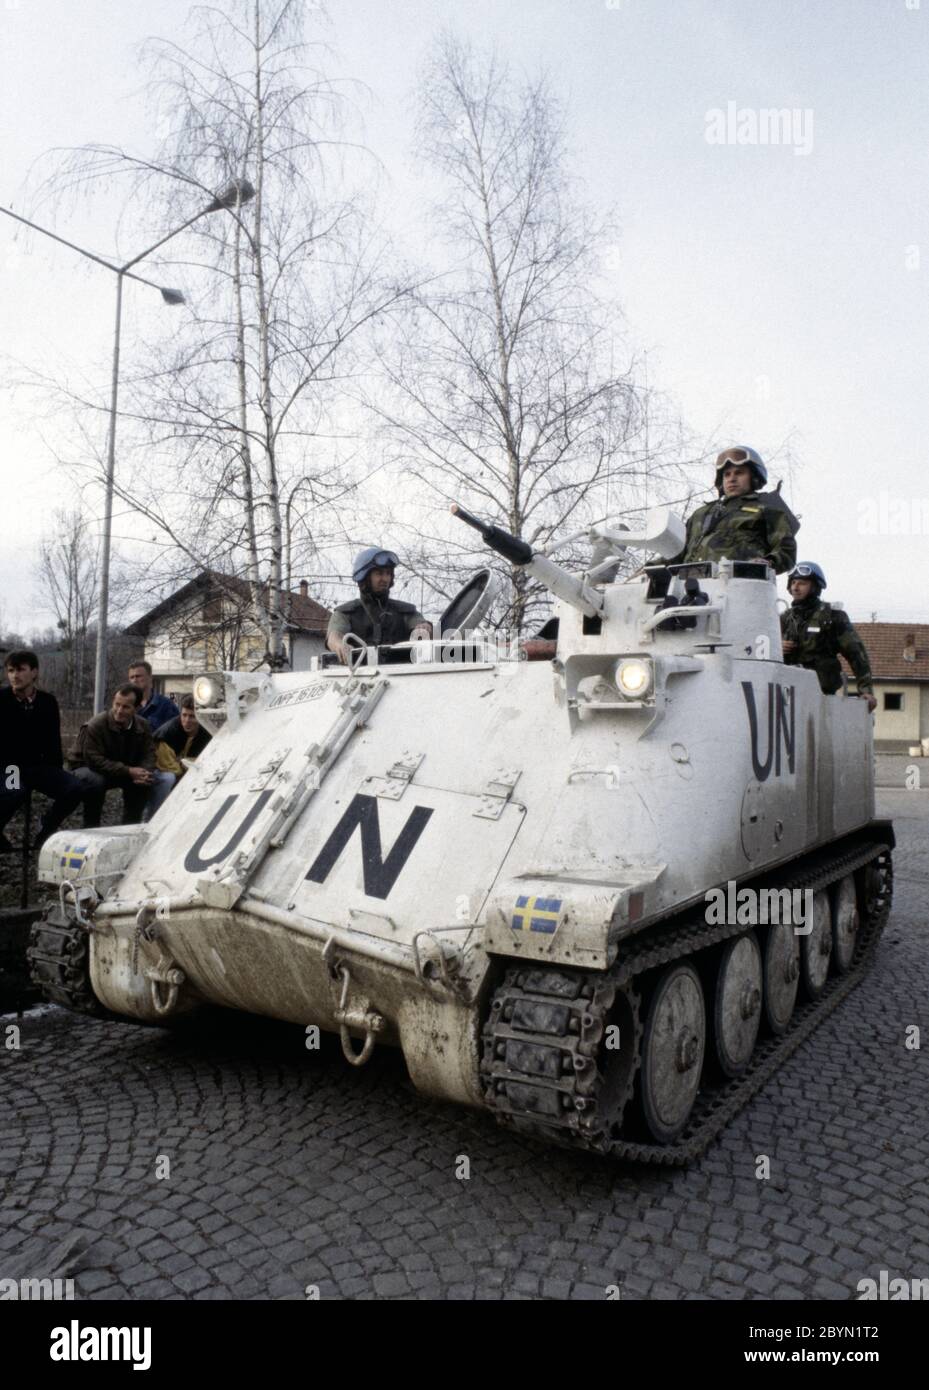 7th March 1994 During the war in Bosnia: a Swedish Häaglunds Pbv (Pansarbandvagn) 302 APC of Nordbat 2 outside the entrance to Tuzla Airport. Stock Photo